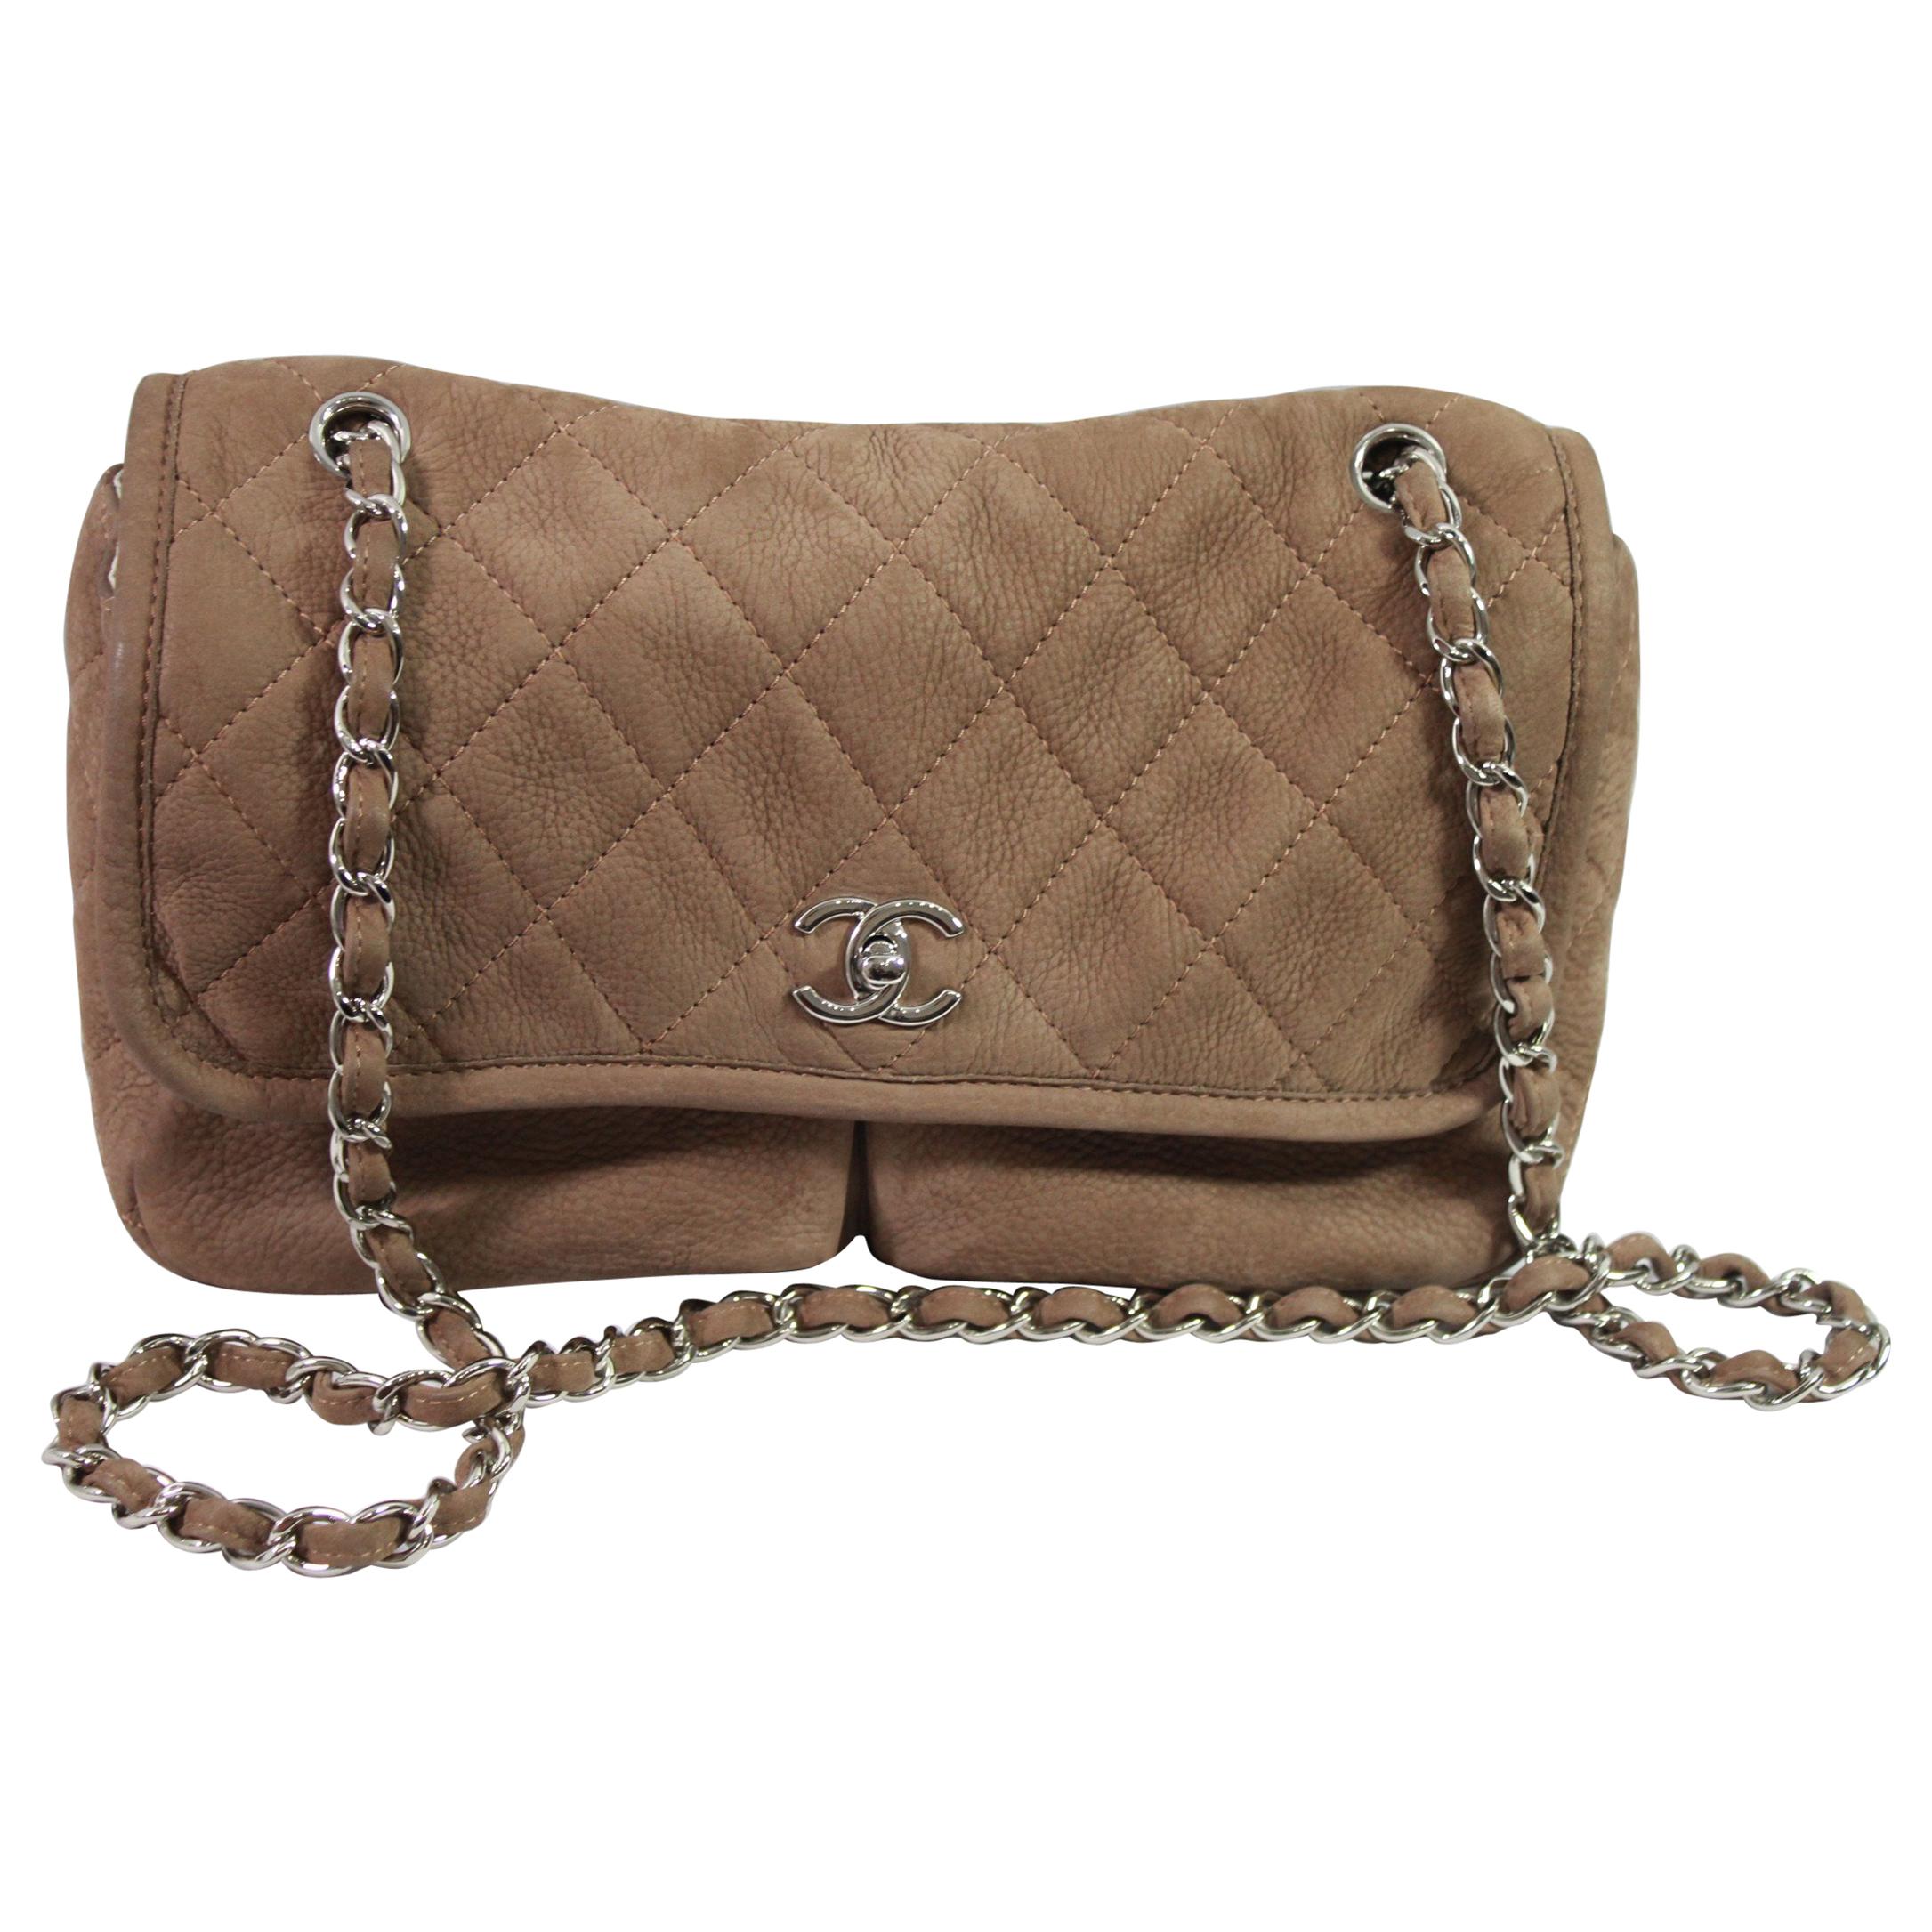 Chanel Brown Crossbidy Classic Leather Bag